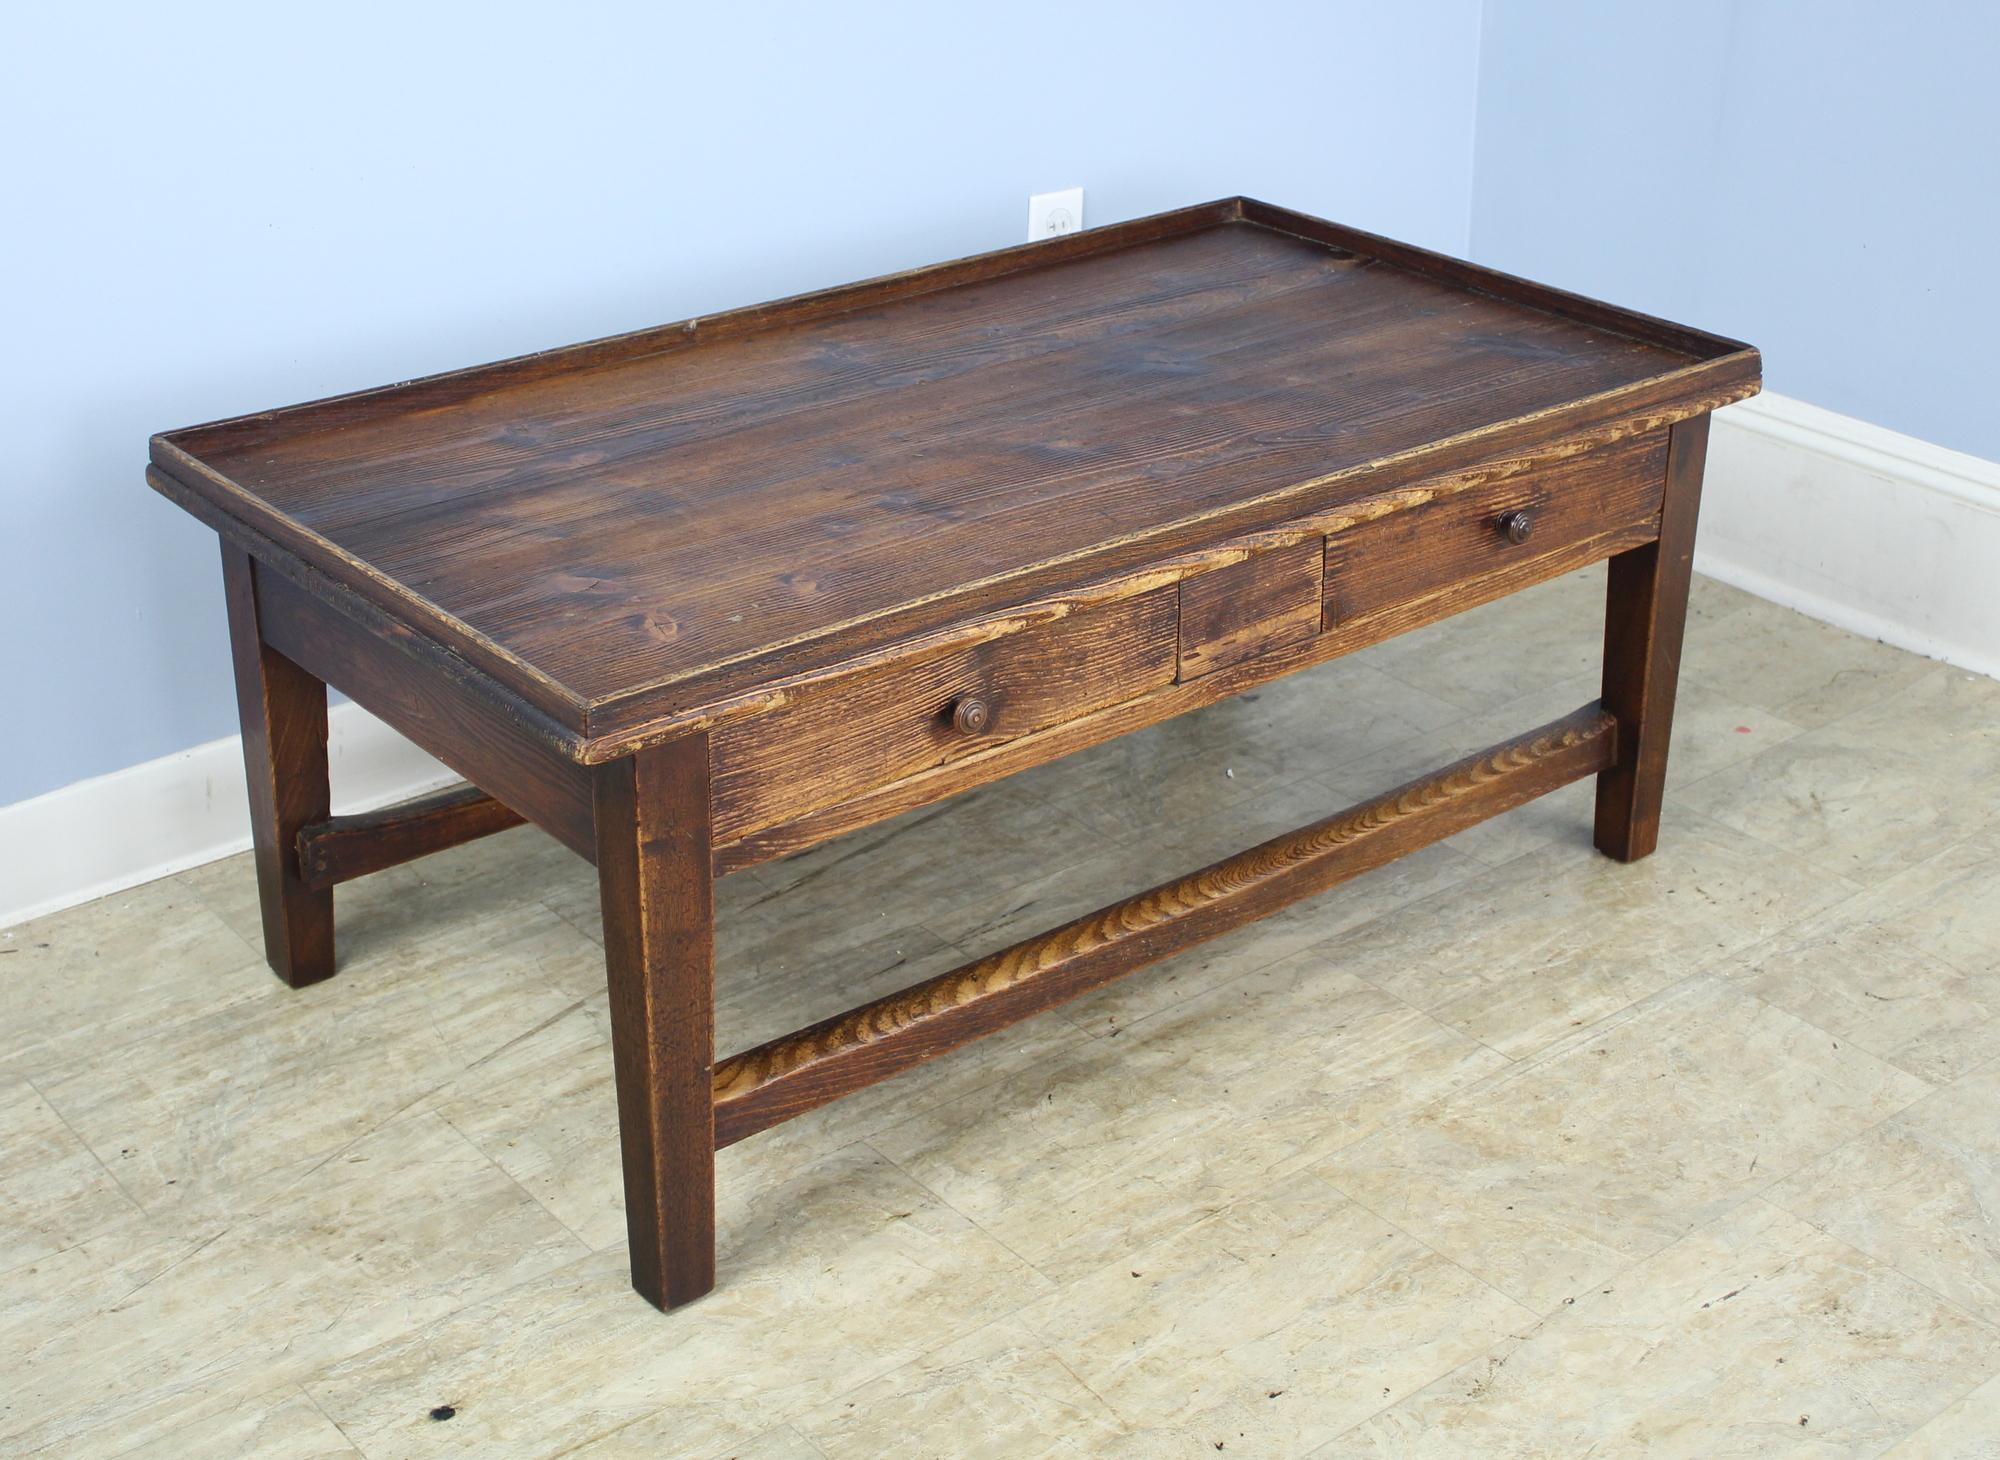 A solid pine tray-top coffee table with two drawers and rustic pine grain and color. The two supports between the legs have good wear and patina. The dramatic color contrast gives this piece a good country look.